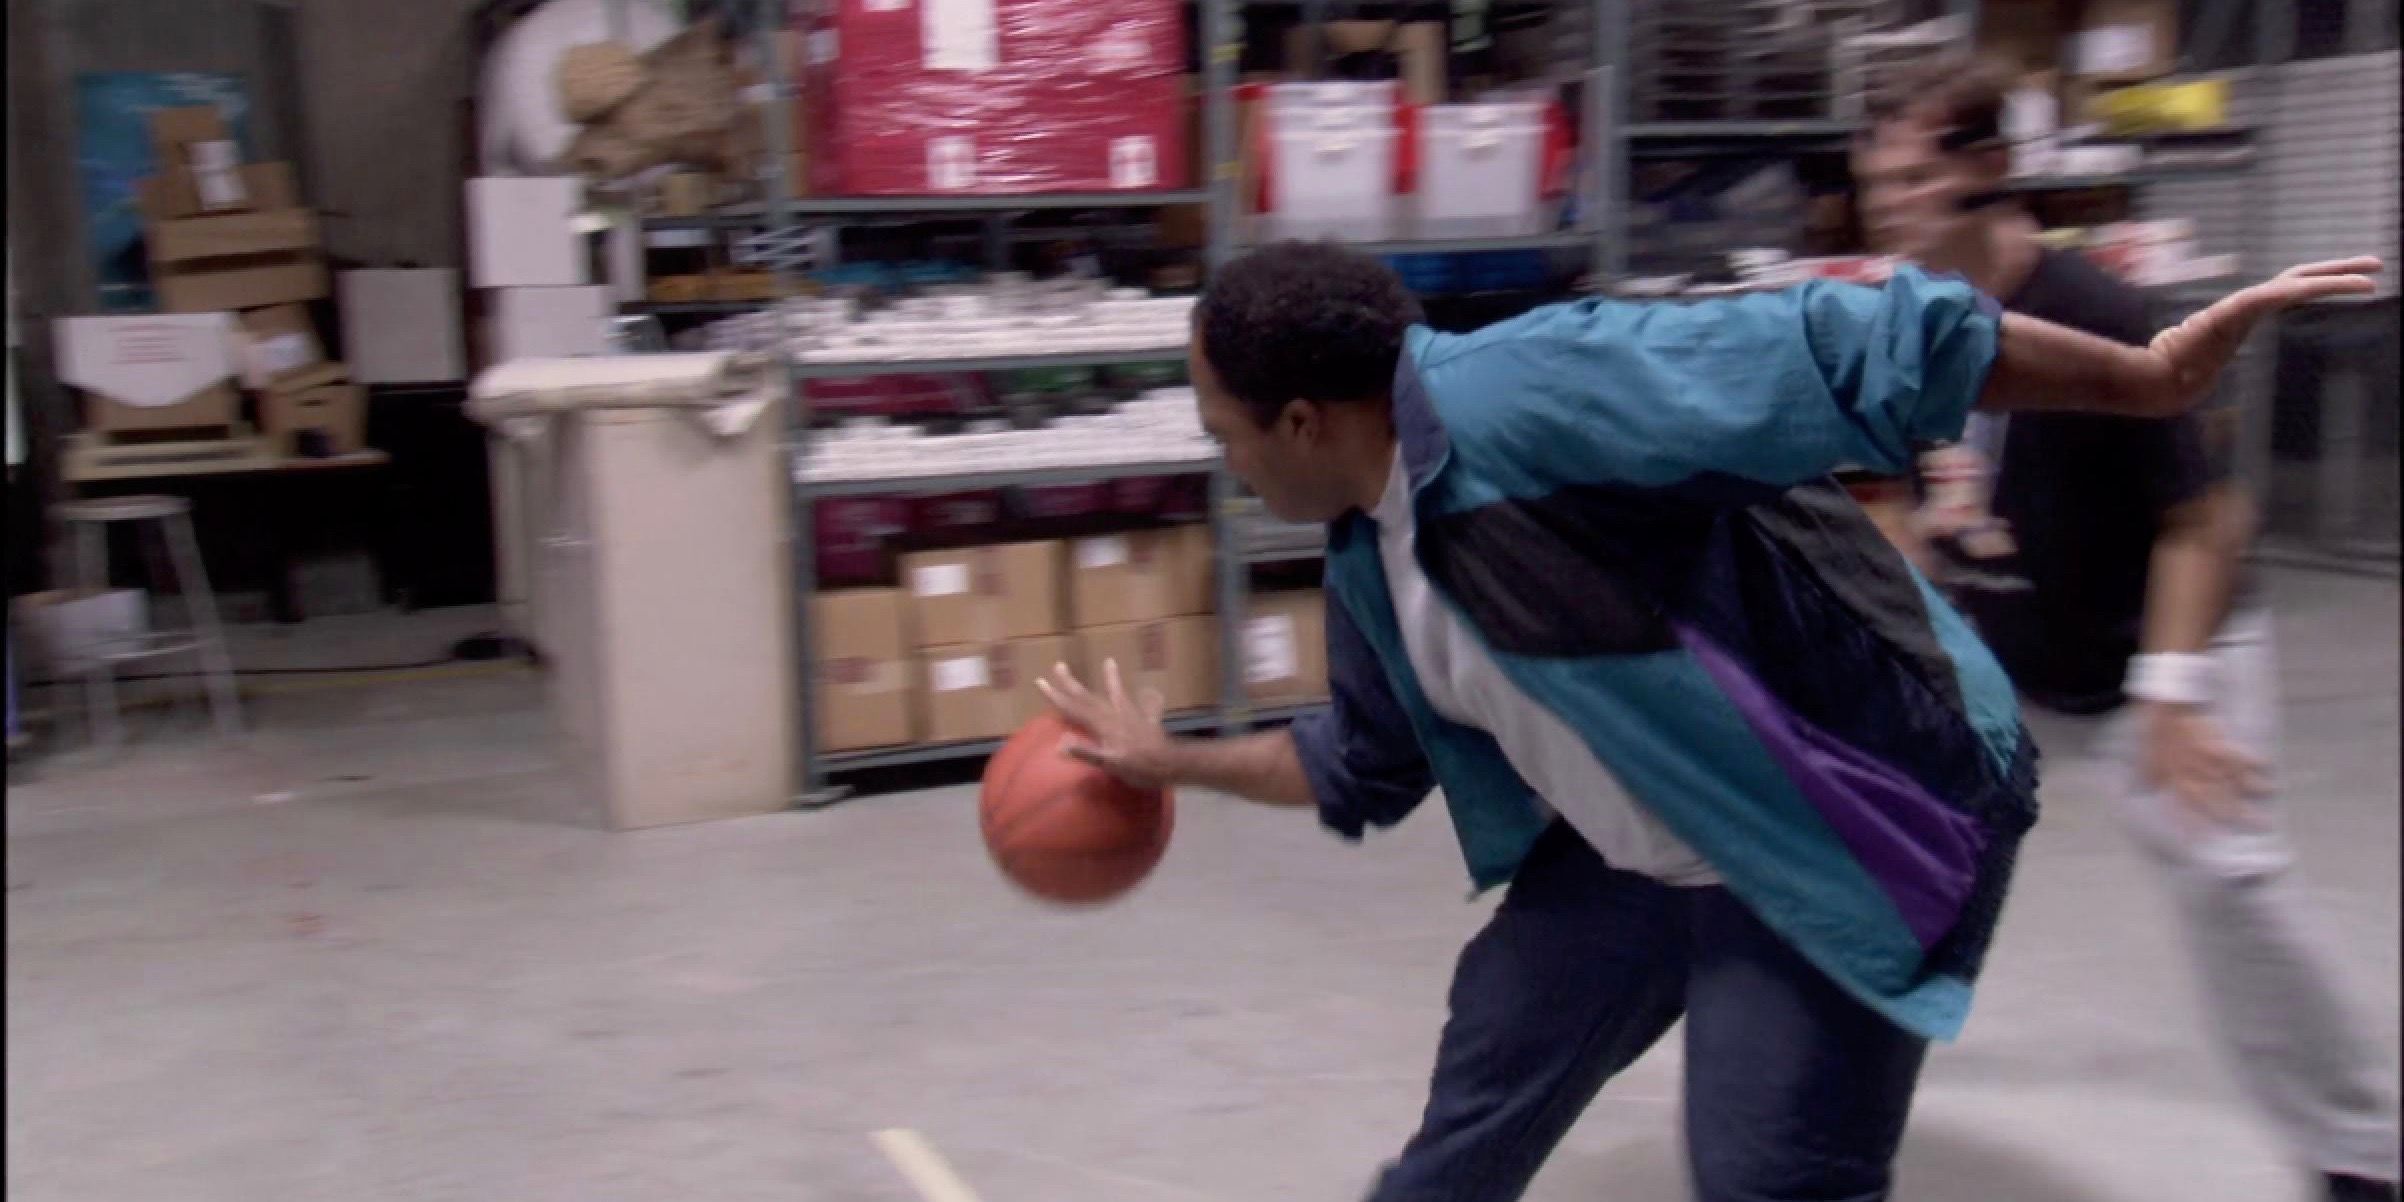 Stanley Playing Basketball In The Office.